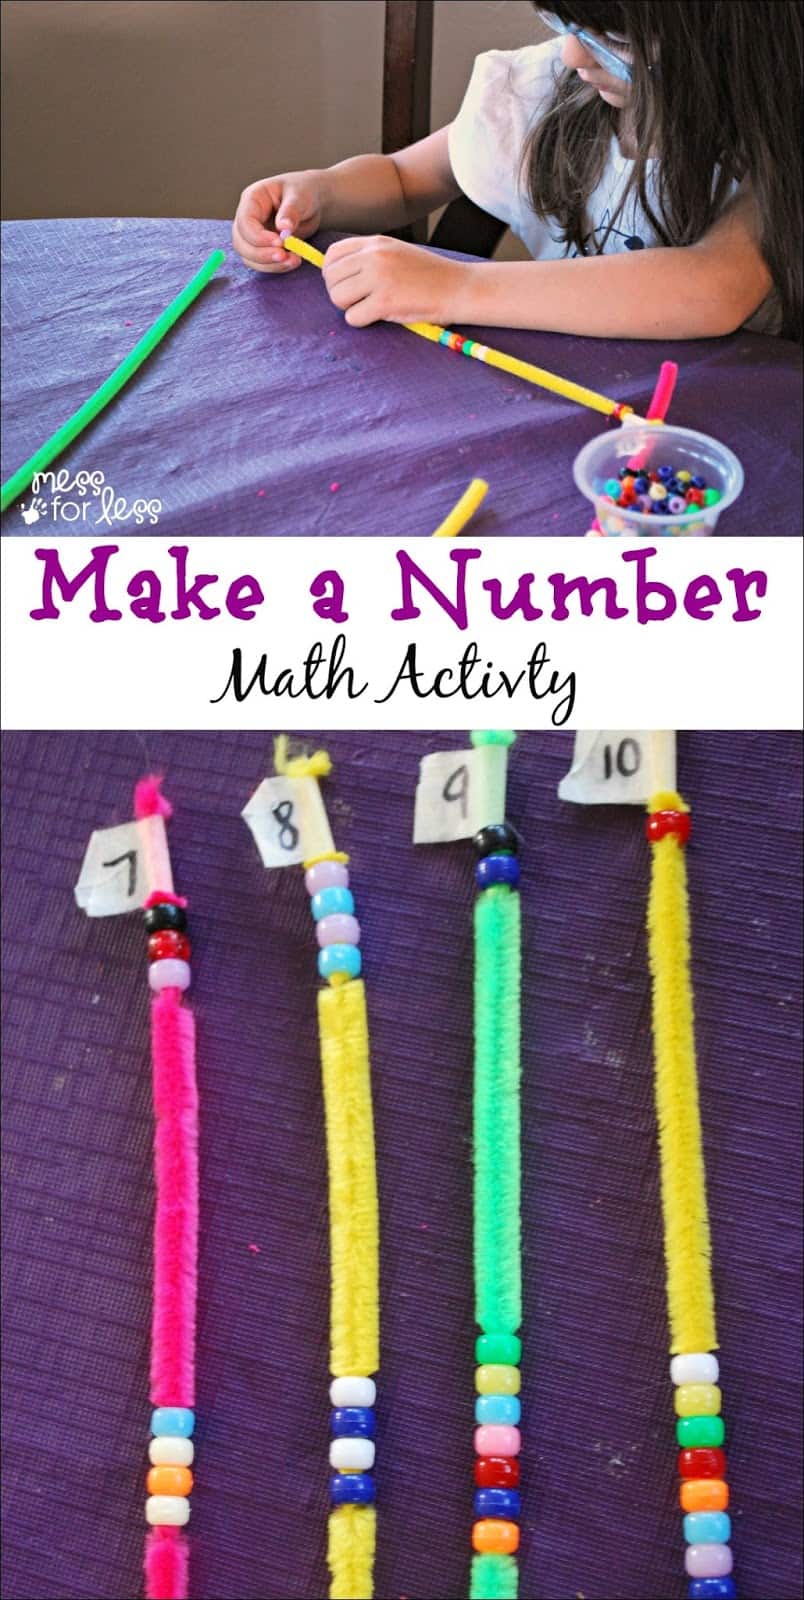 Make a Number Math Game - Kids strengthen their number sense as they think about all the ways to make a number.